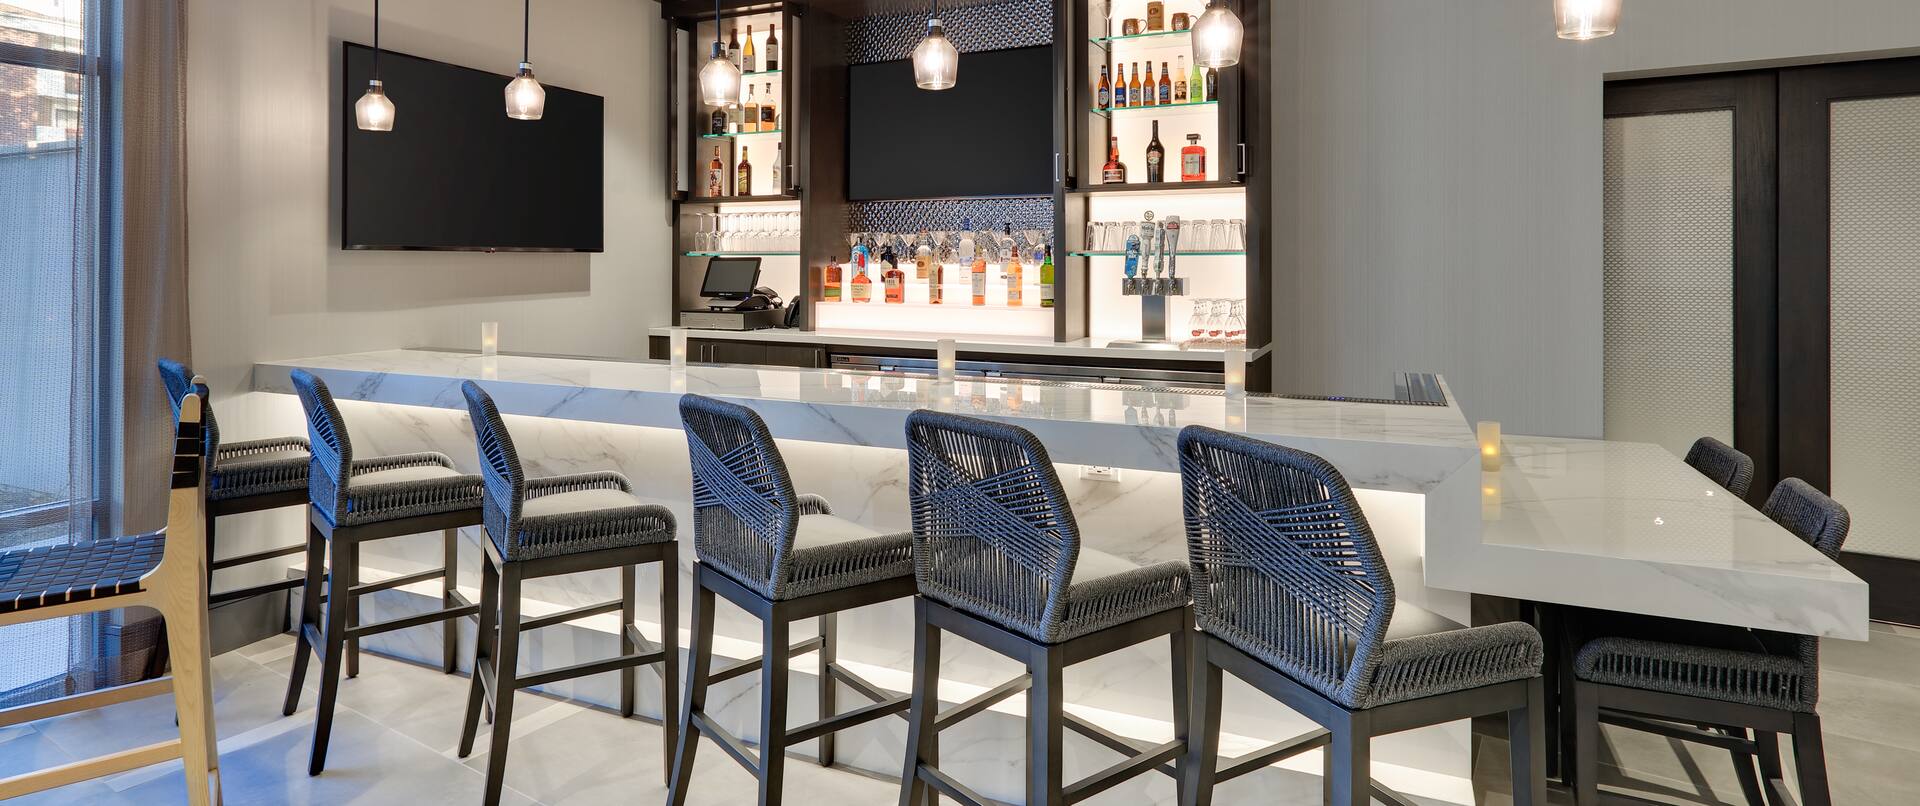 Bar with Seating